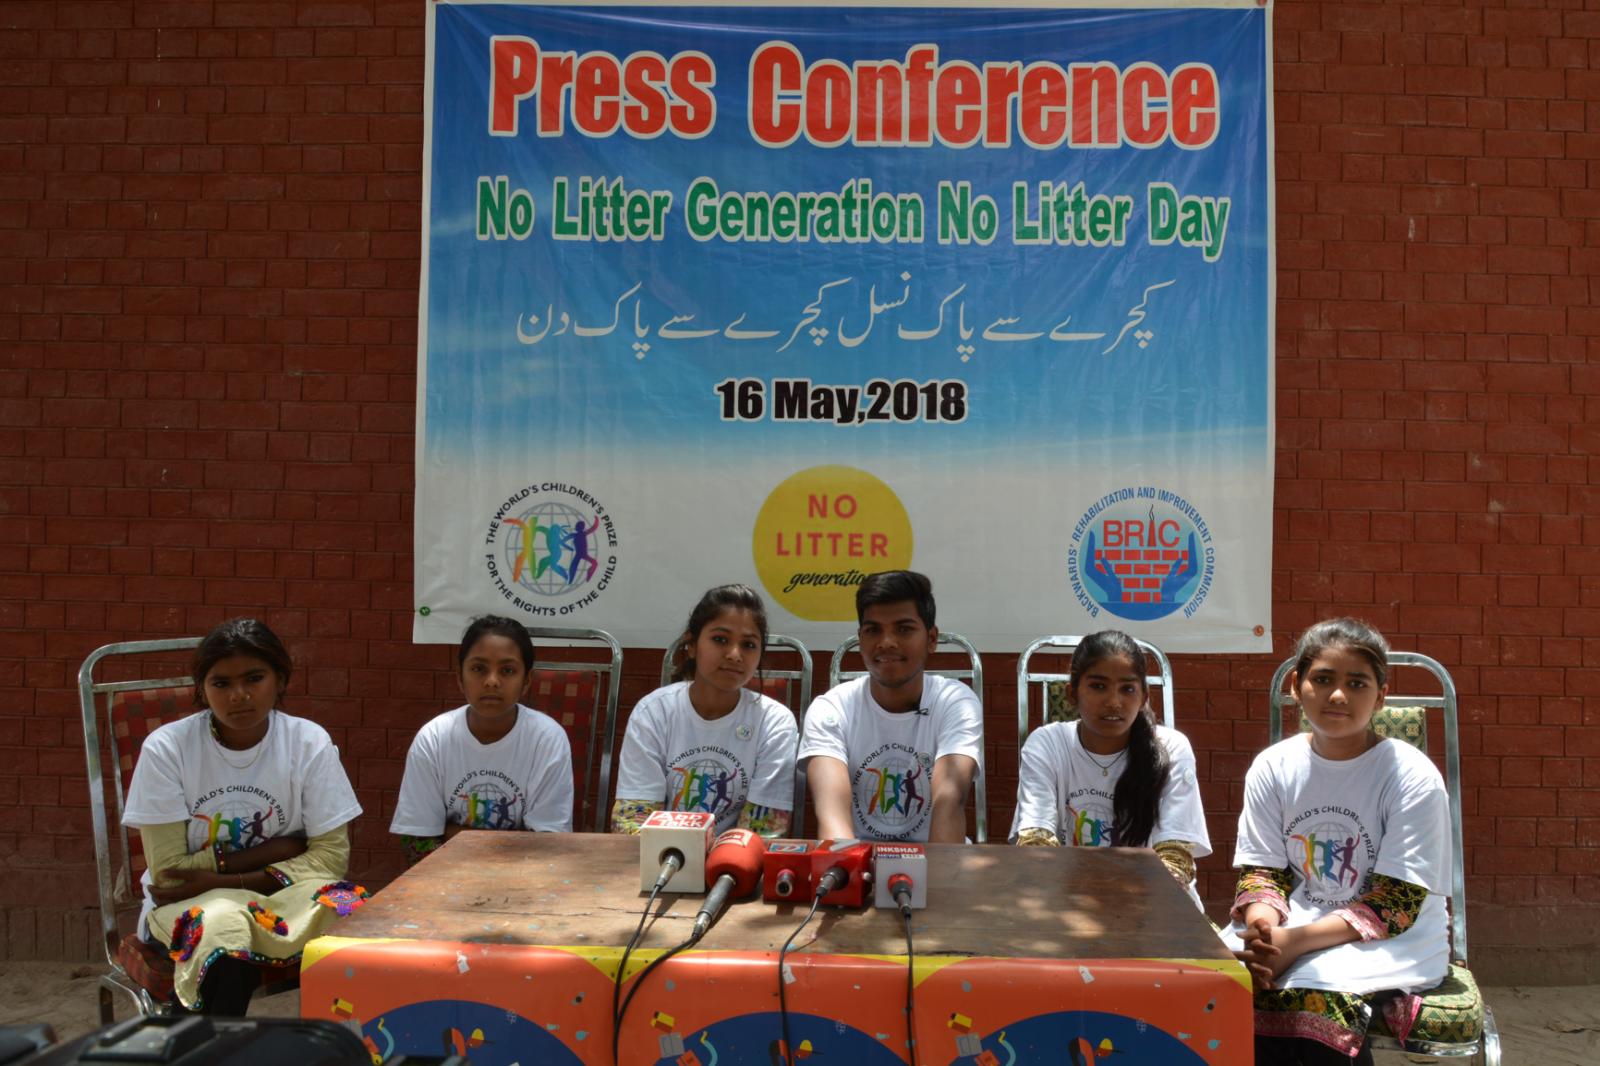 No Litter Day press conference, children sitting at a table with microphones